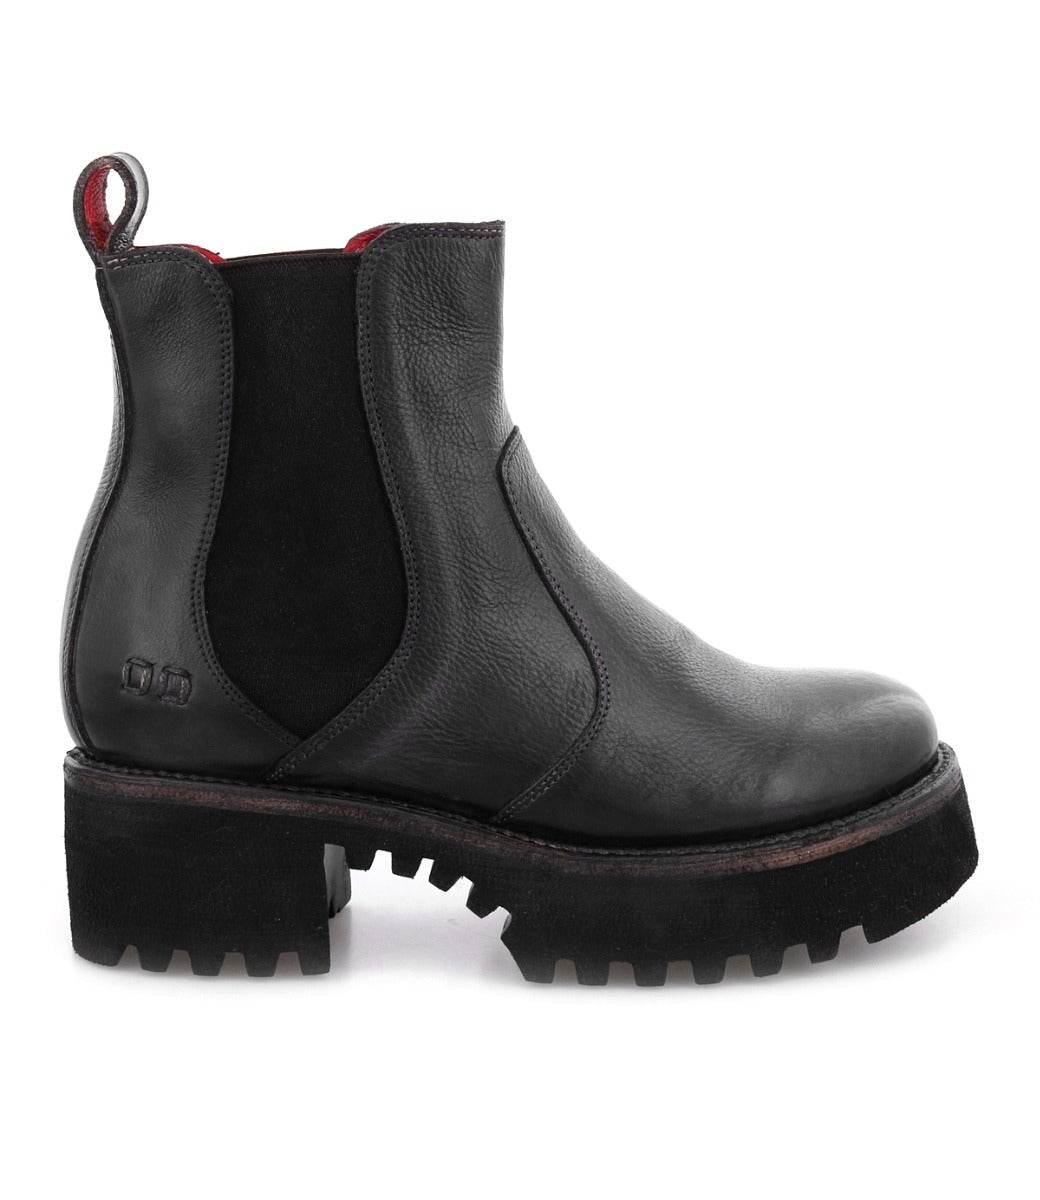 A Valda Hi by Bed Stu chelsea boot with a red sole.